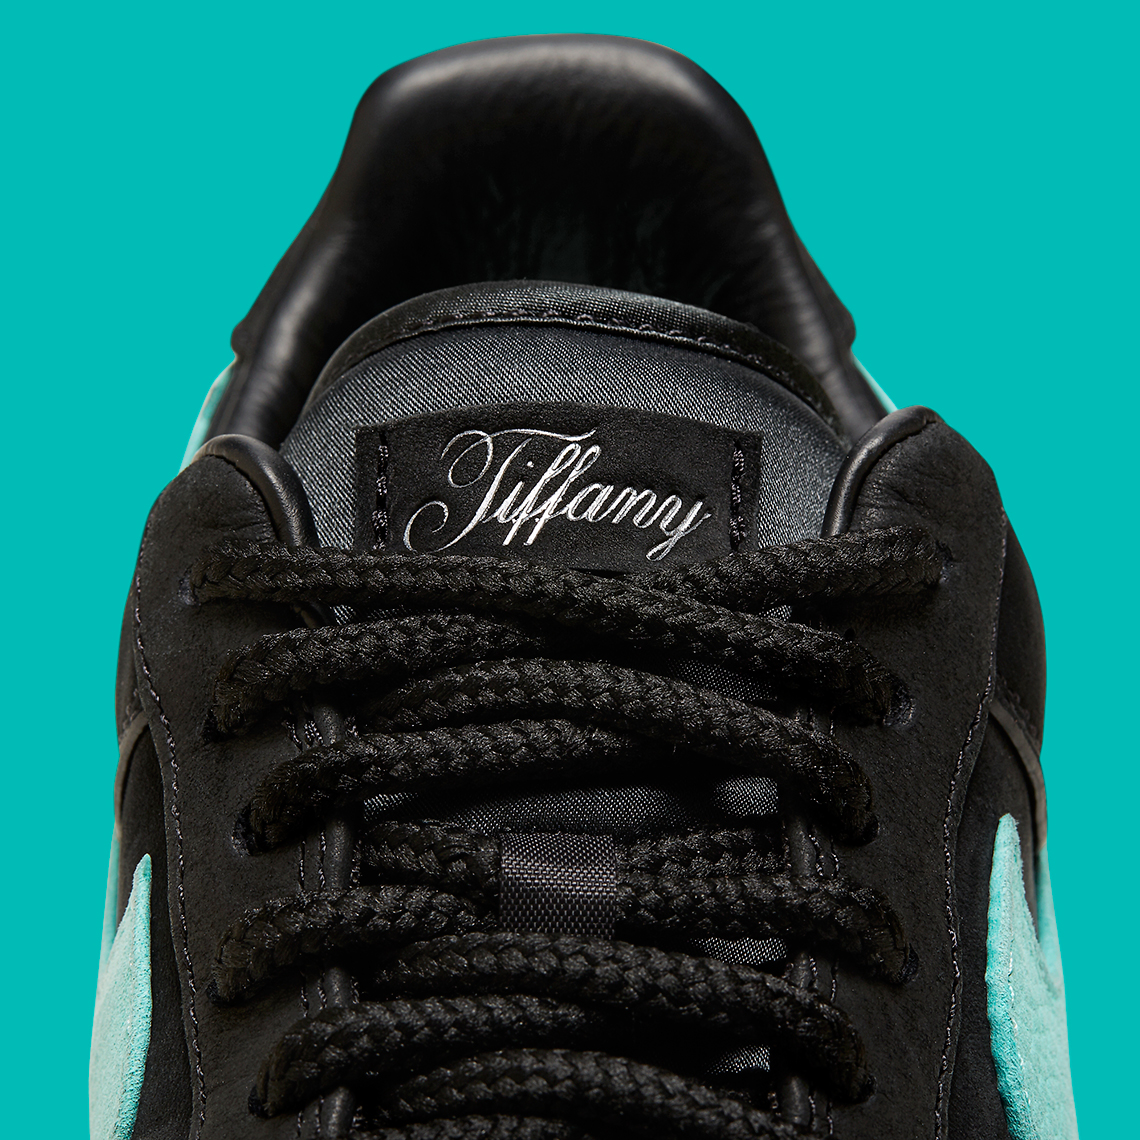 Tiffany Nike Air Force 1 DZ1382-001 Release Date | SneakerNews.com